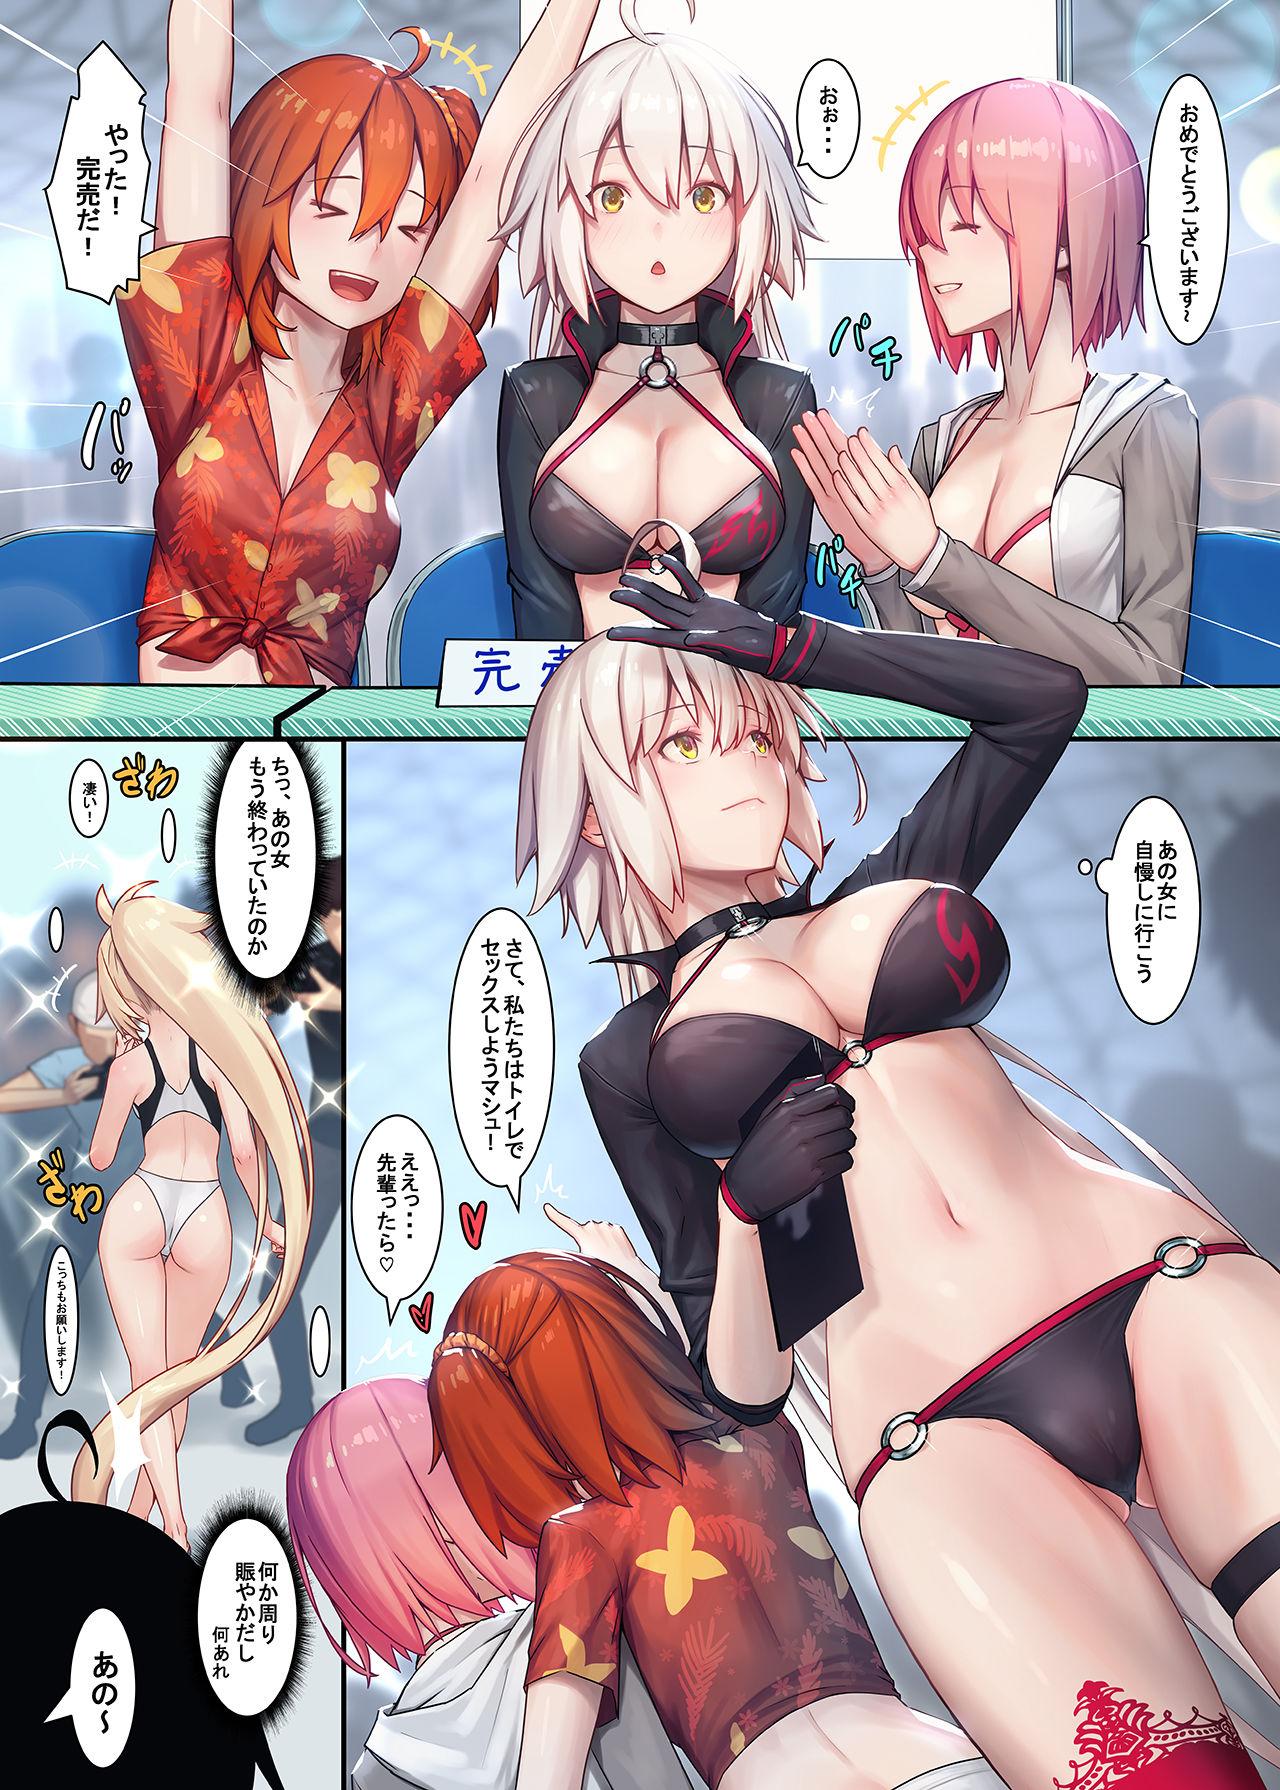 Yanks Featured Fate/Gentle Order 4 "Alter" - Fate grand order Bigbooty - Page 3